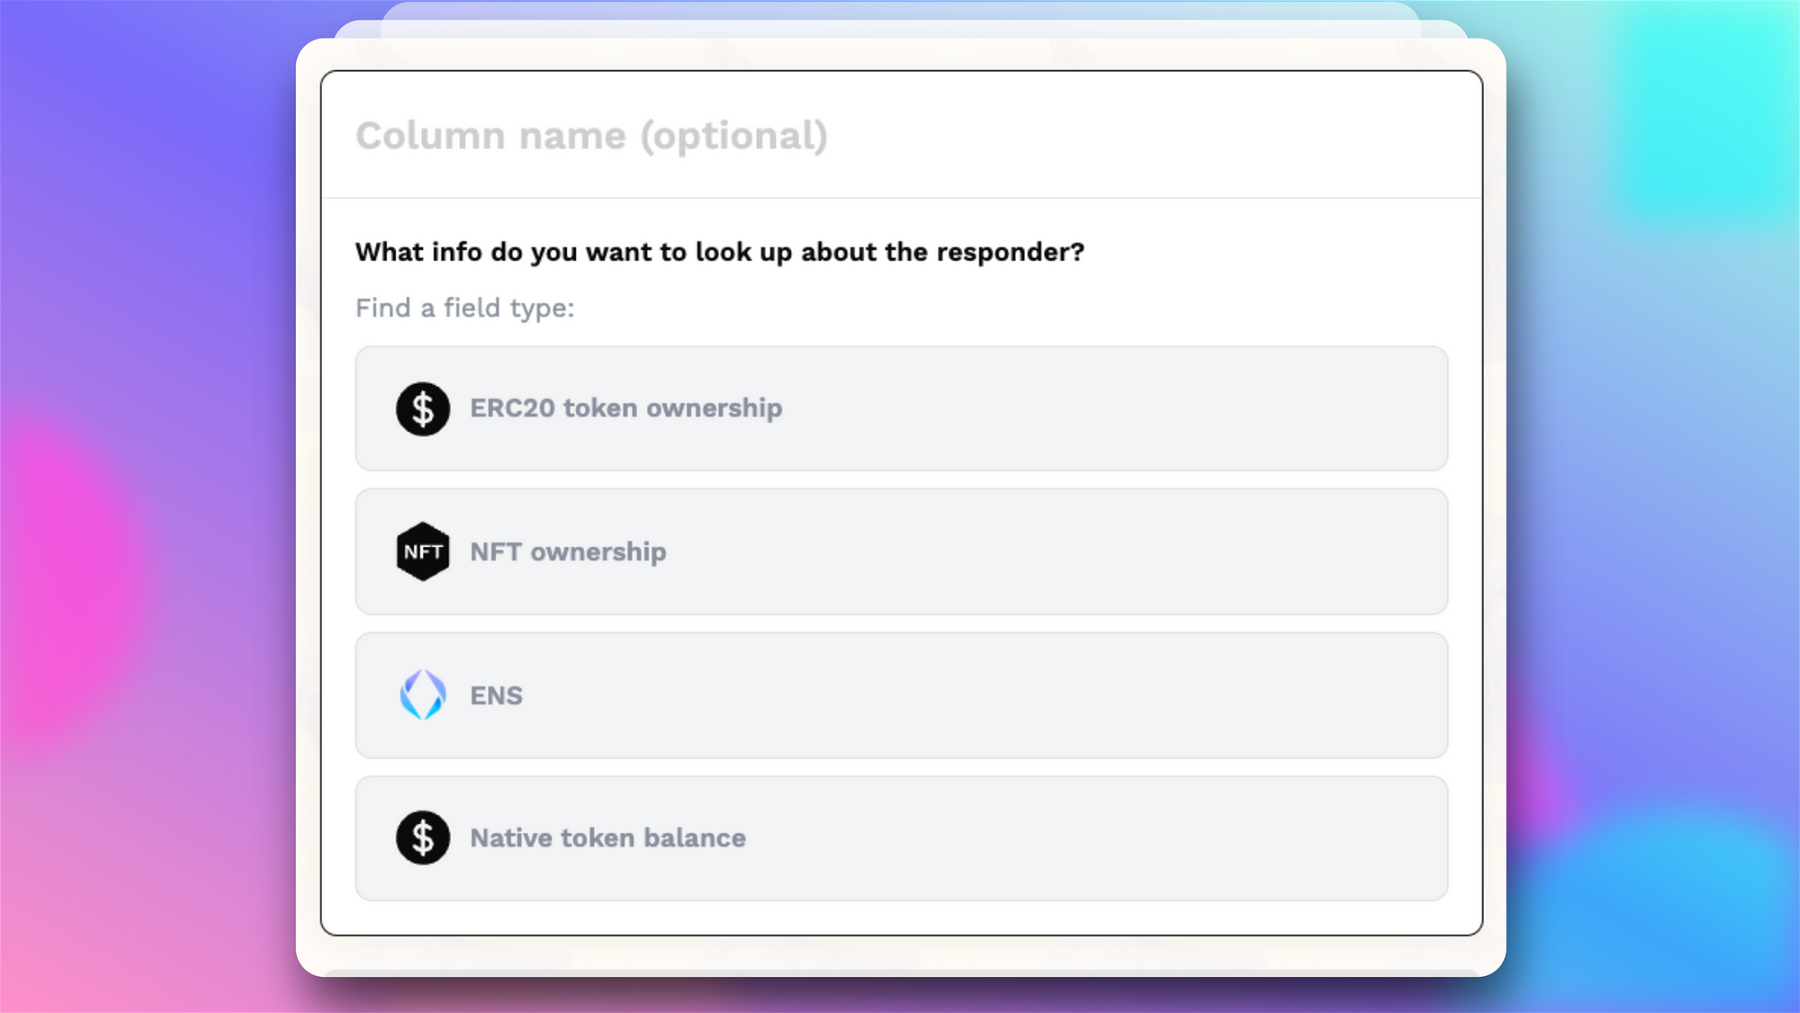 You can use data lookups to look up certain information about a responder. Current options are: ERC20 token ownership, NFT ownership, ENS, and native token balance.